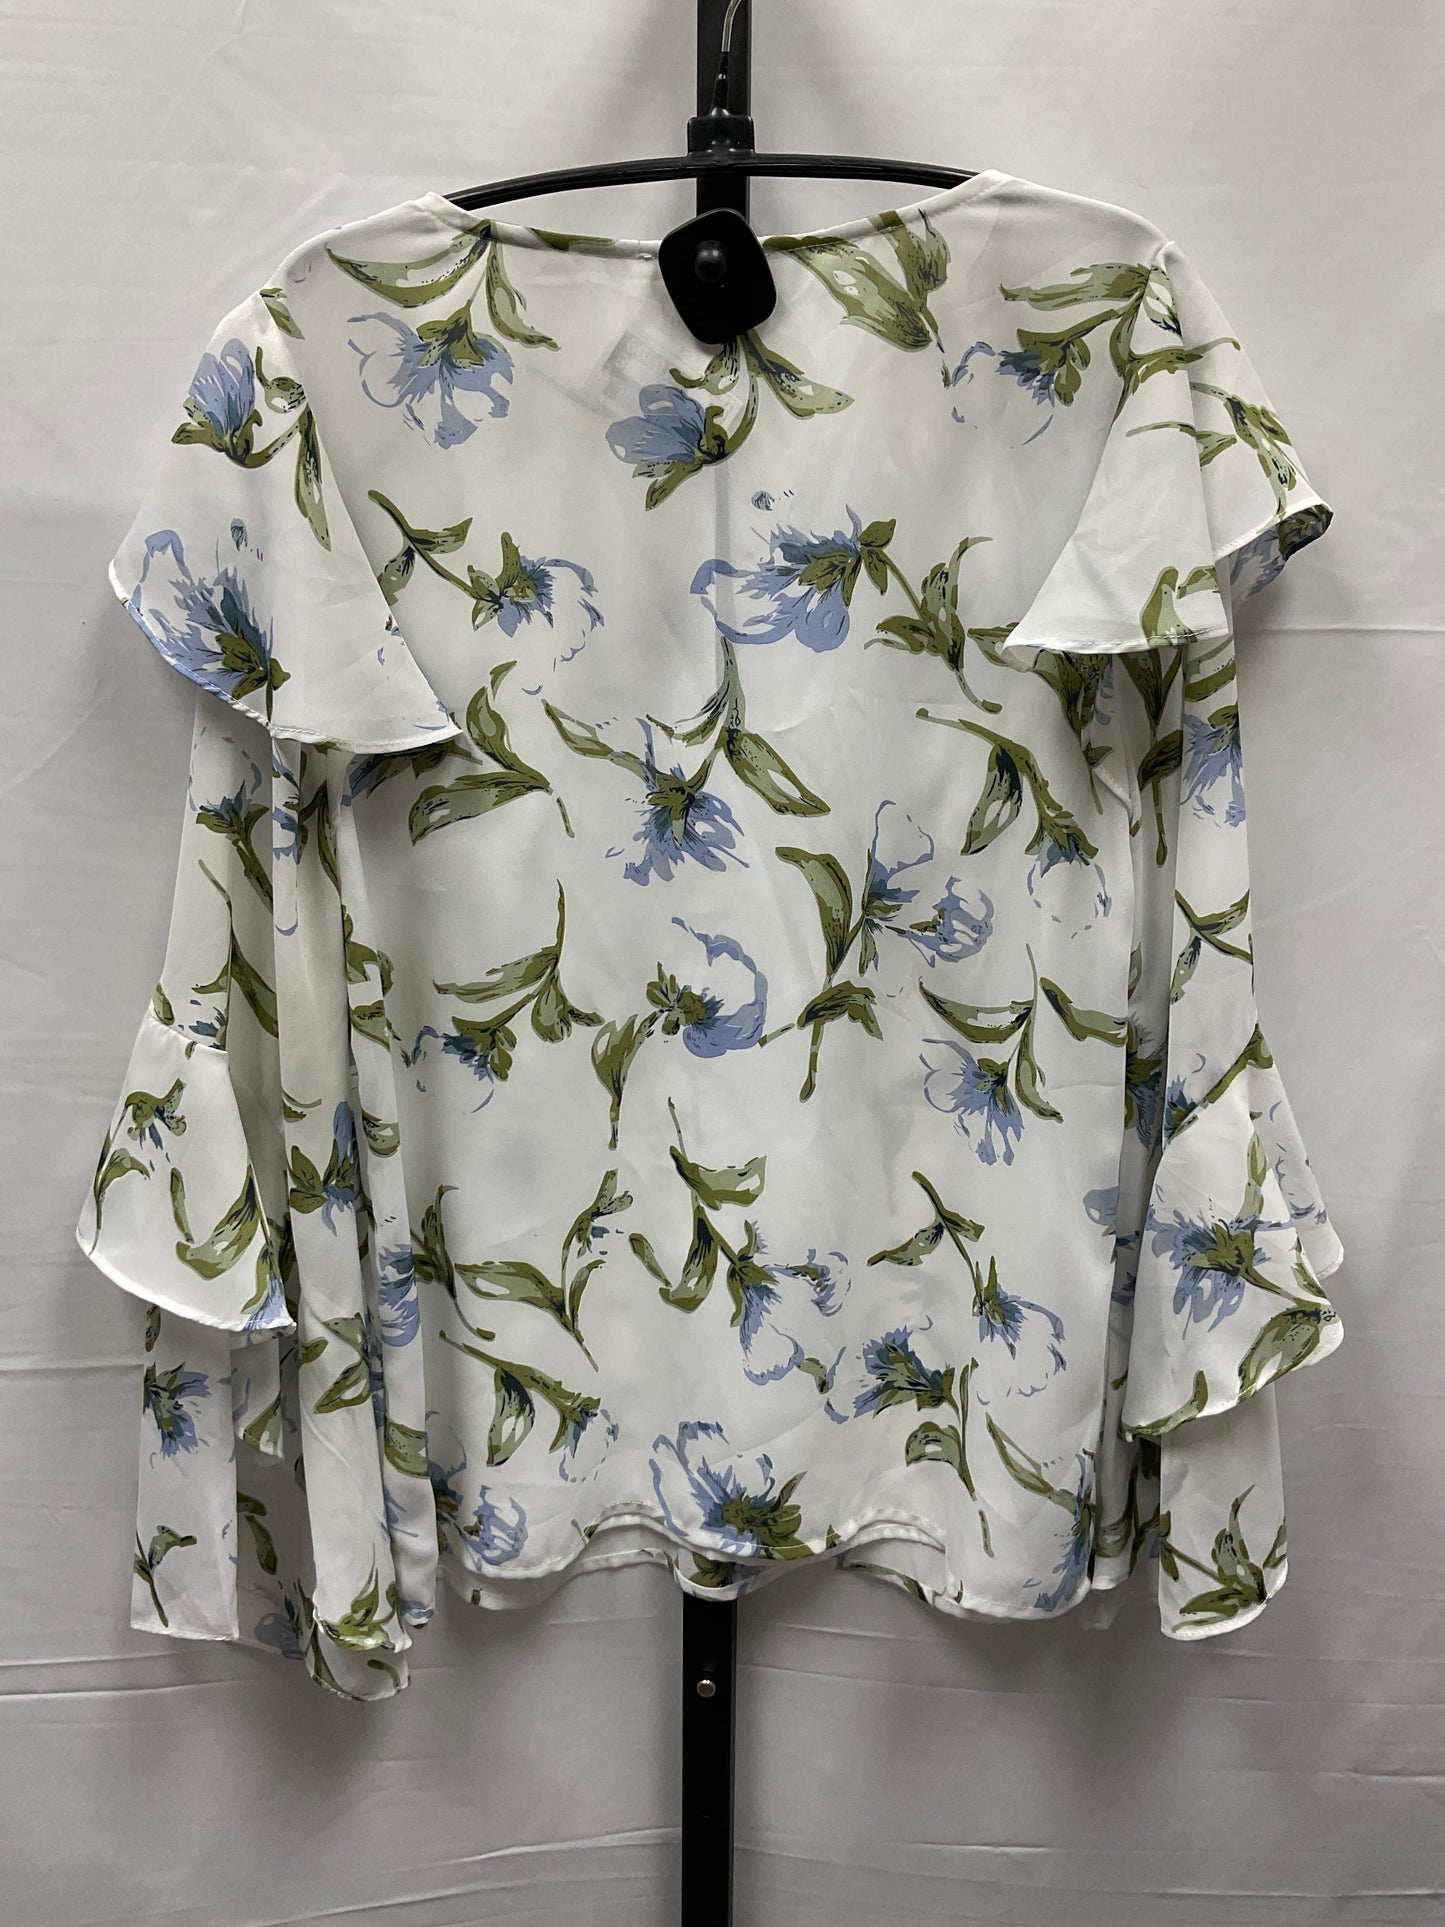 Floral Print Top Long Sleeve Entro, Size S